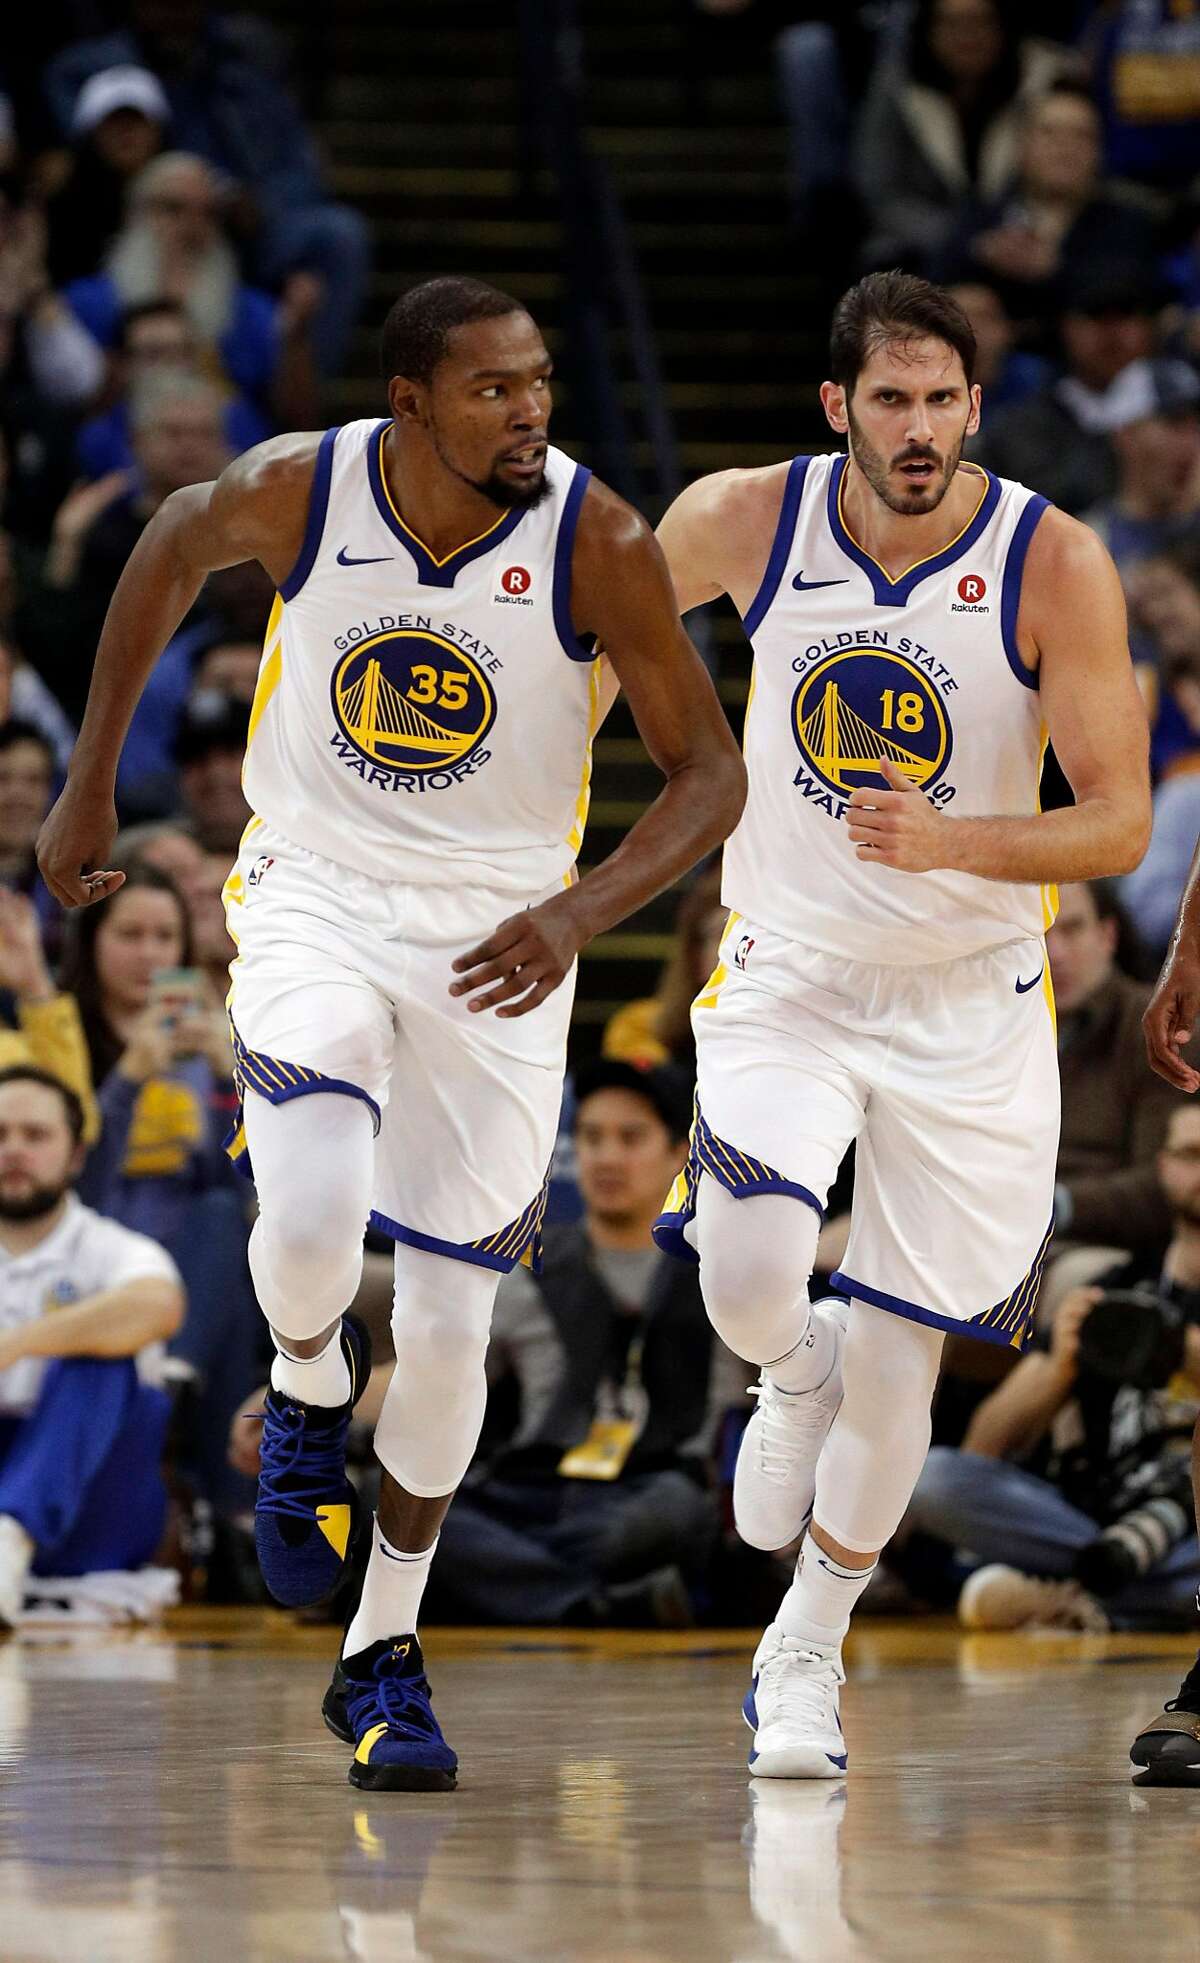 Kevin Durant (35) and Omri Casspi (18) head back up court after Casspi scored in the first half as the Golden State Warriors played the Utah Jazz at Oracle Arena in Oakland, Calif., on Wednesday, December 27, 2017.